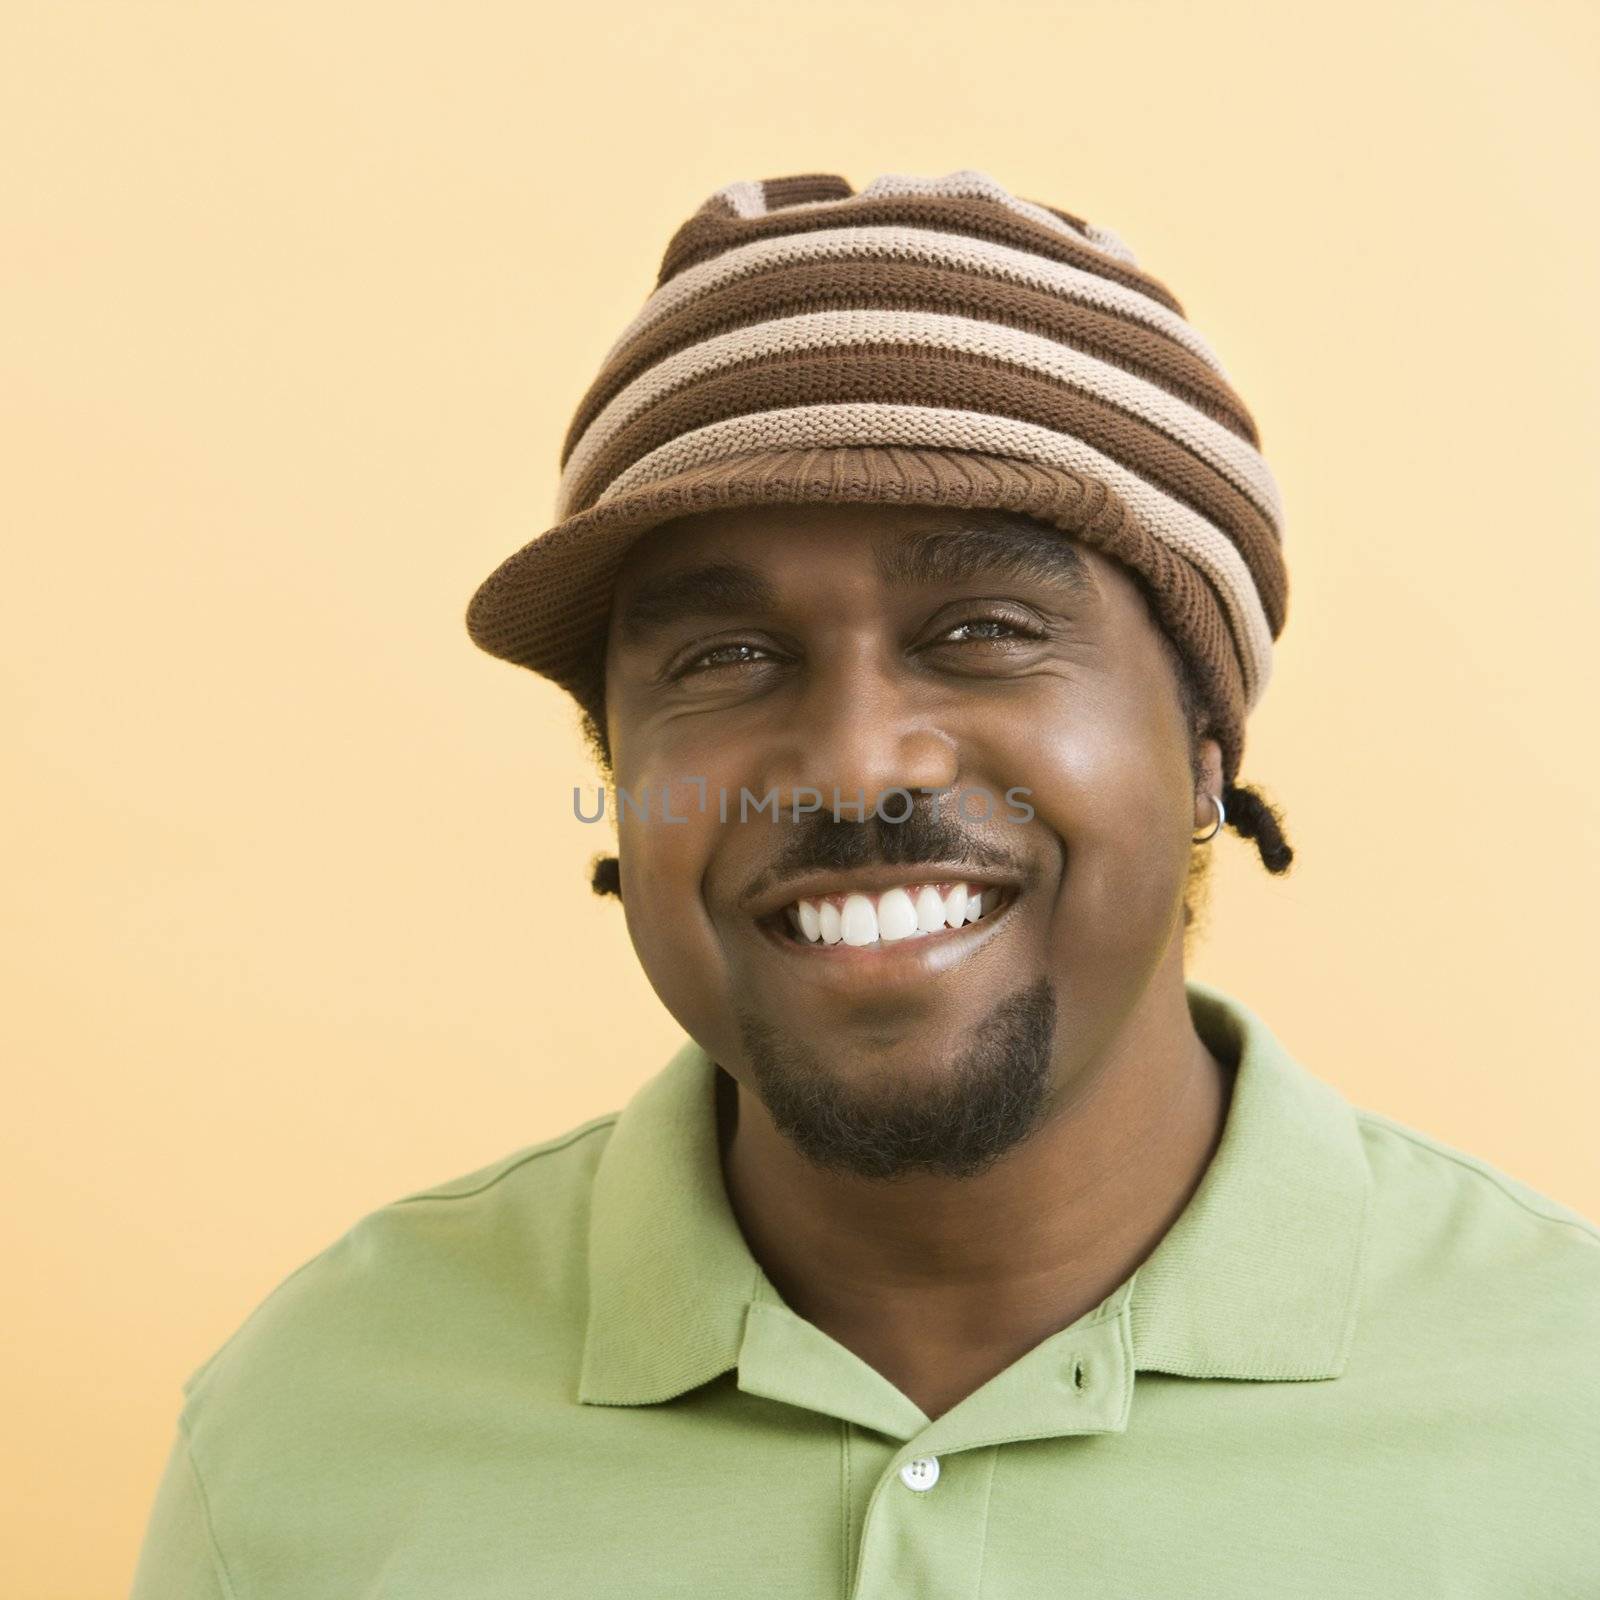 African-American mid-adult man wearing knit hat with brim smiling at viewer.